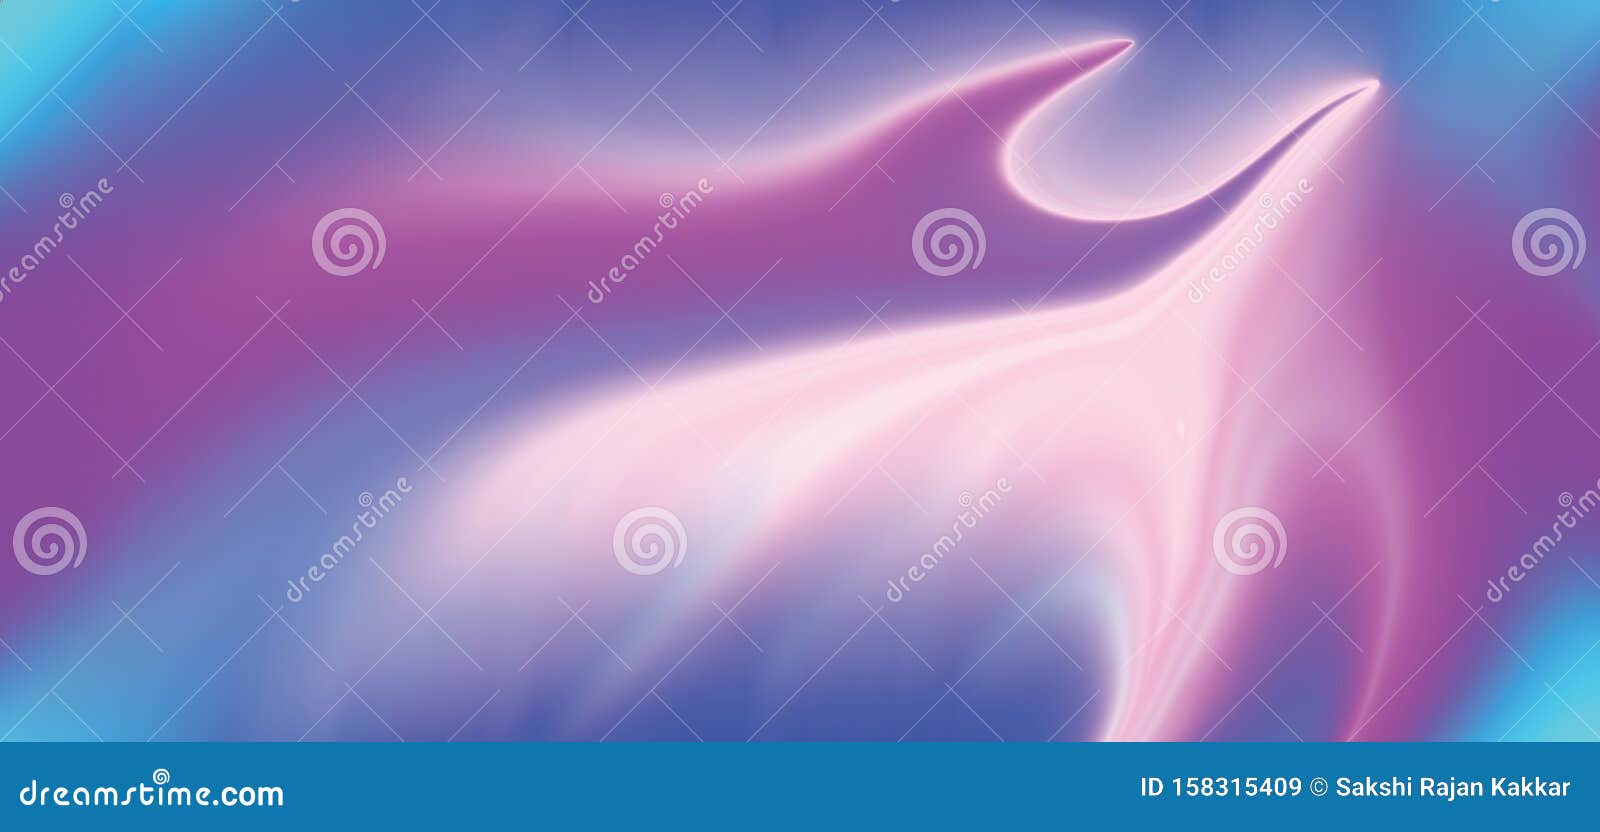 Color Ful Nature Hand with Lighted and Sparkling Effect Computer Generated  Background Image for Wallpaper Design Stock Illustration - Illustration of  mobile, abstract: 158315409